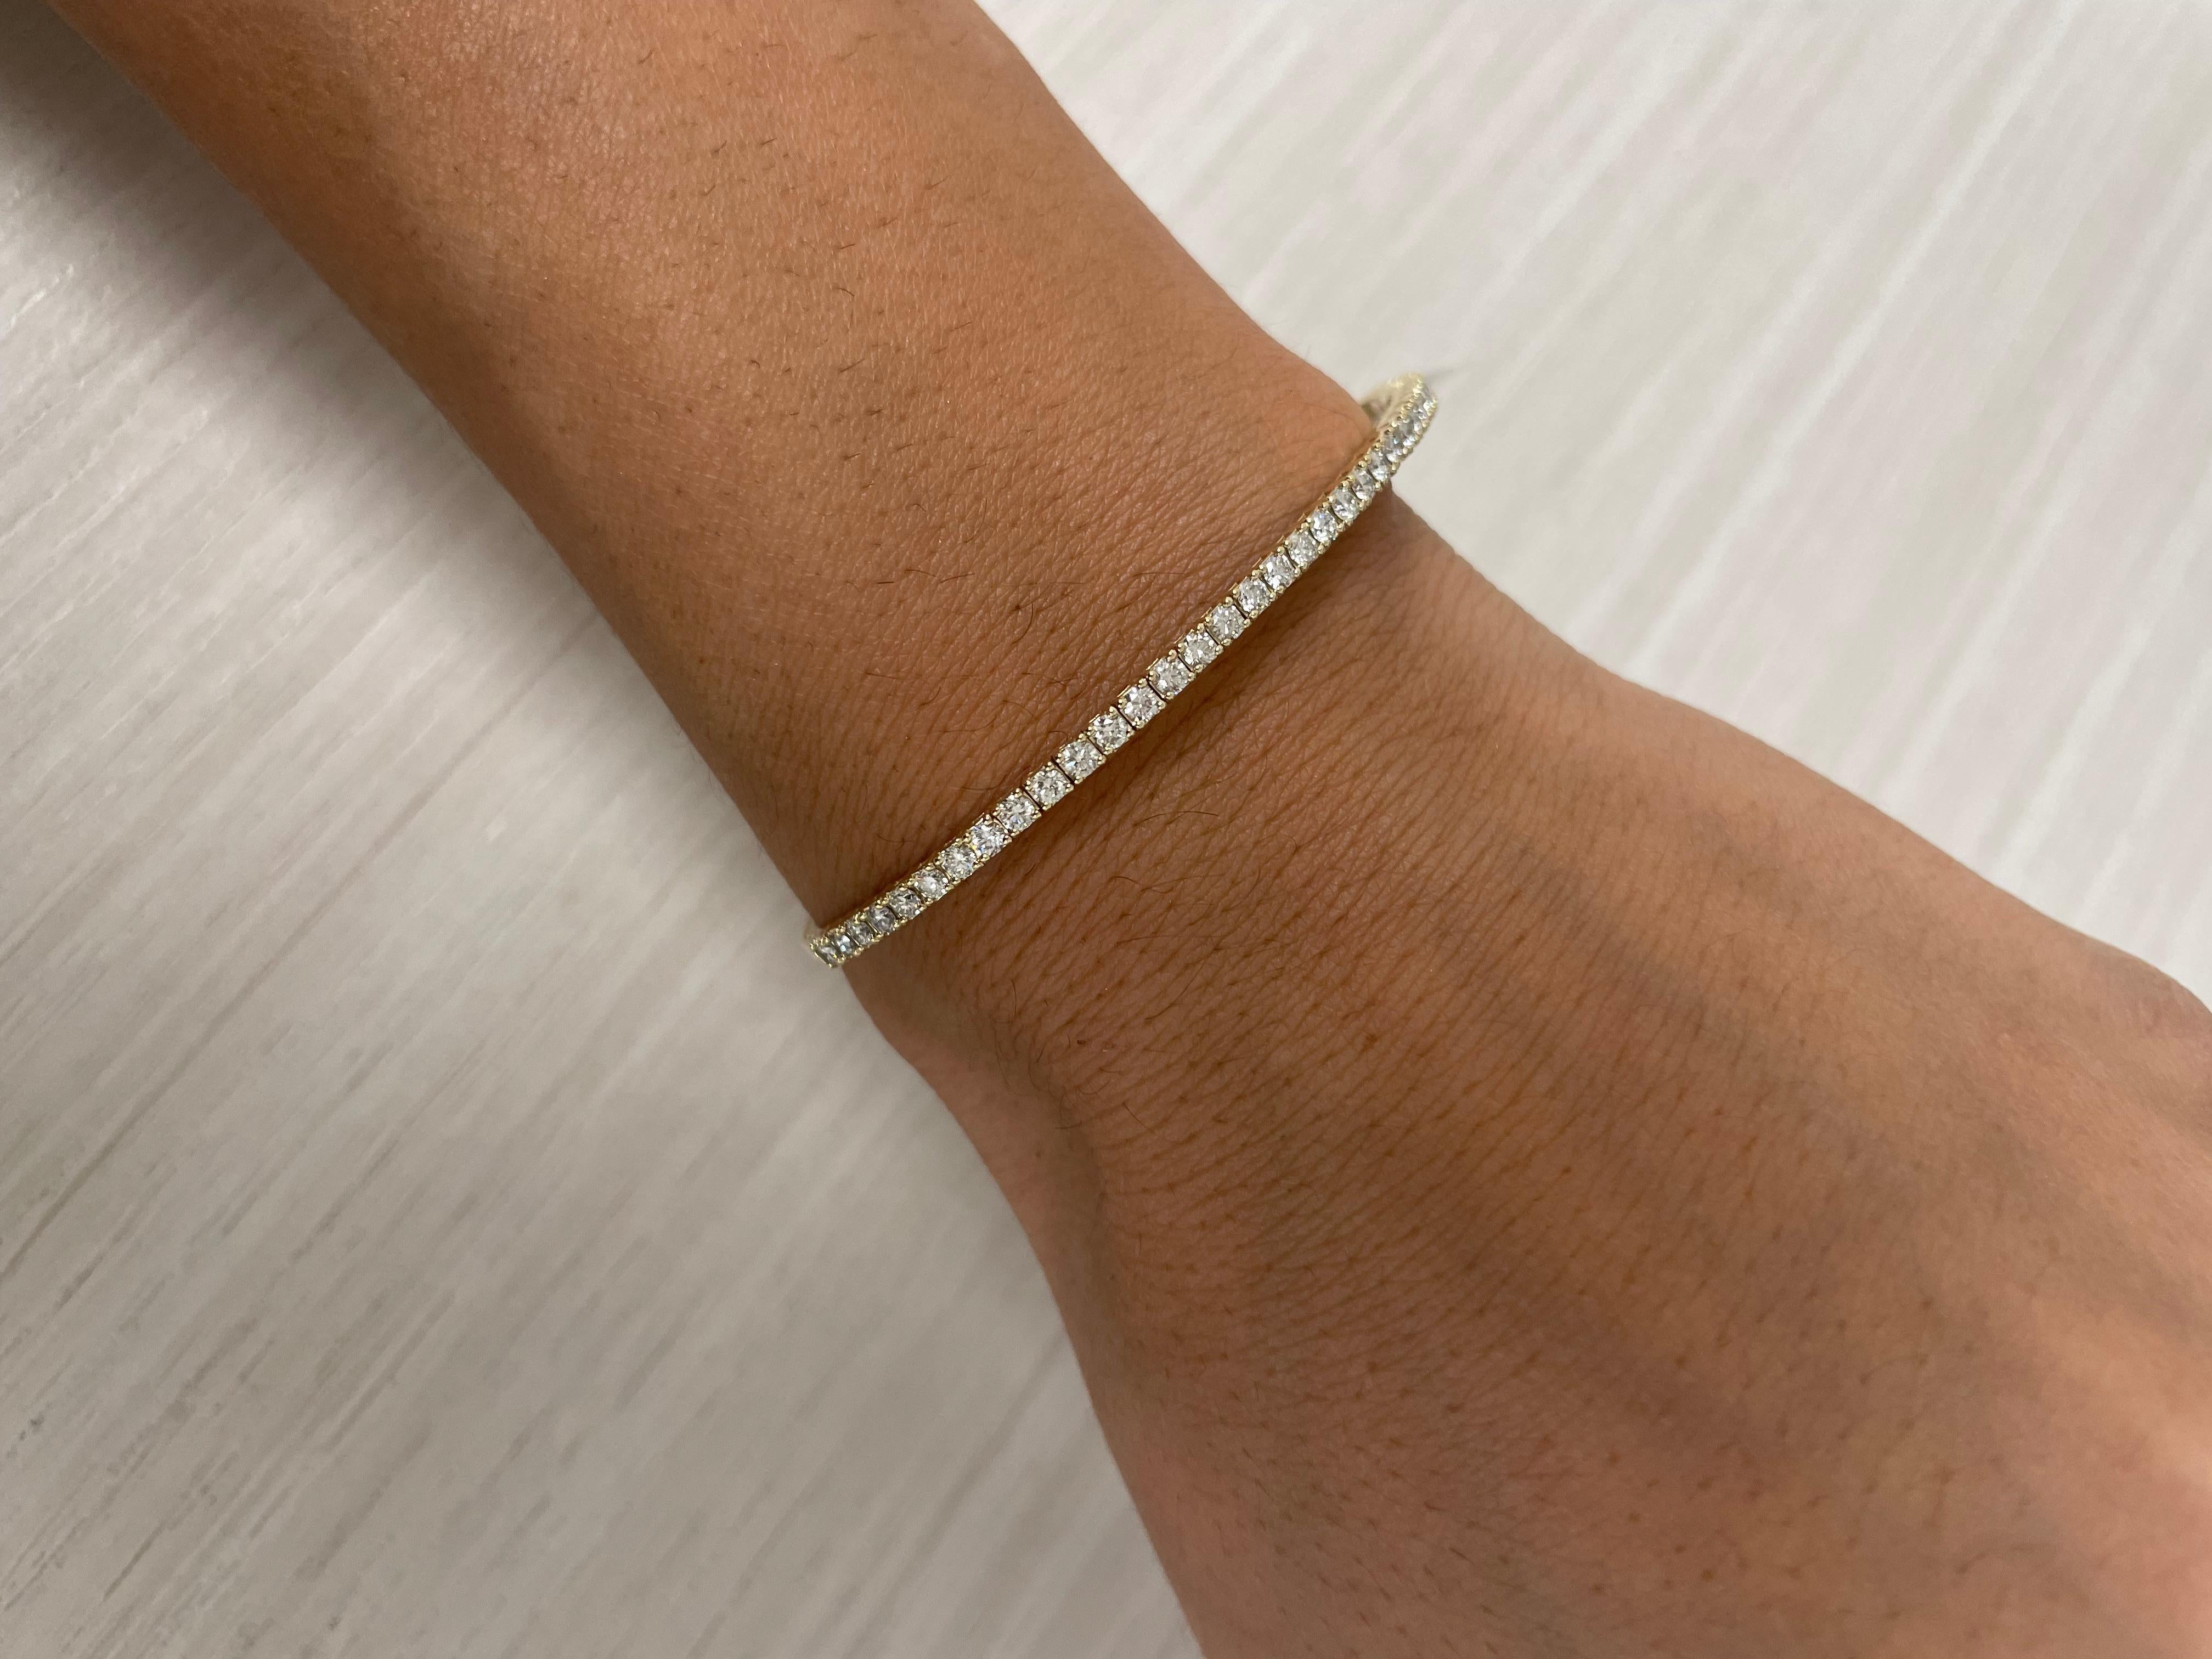 Quality Stackable Bangle: Made from real 14k gold and 37 glittering white approximately 1.49 ct. Certified diamonds, featuring a single row of white diamonds flexible diameter for comfort with a color and clarity of GH-SI
 Surprise Your Loved One